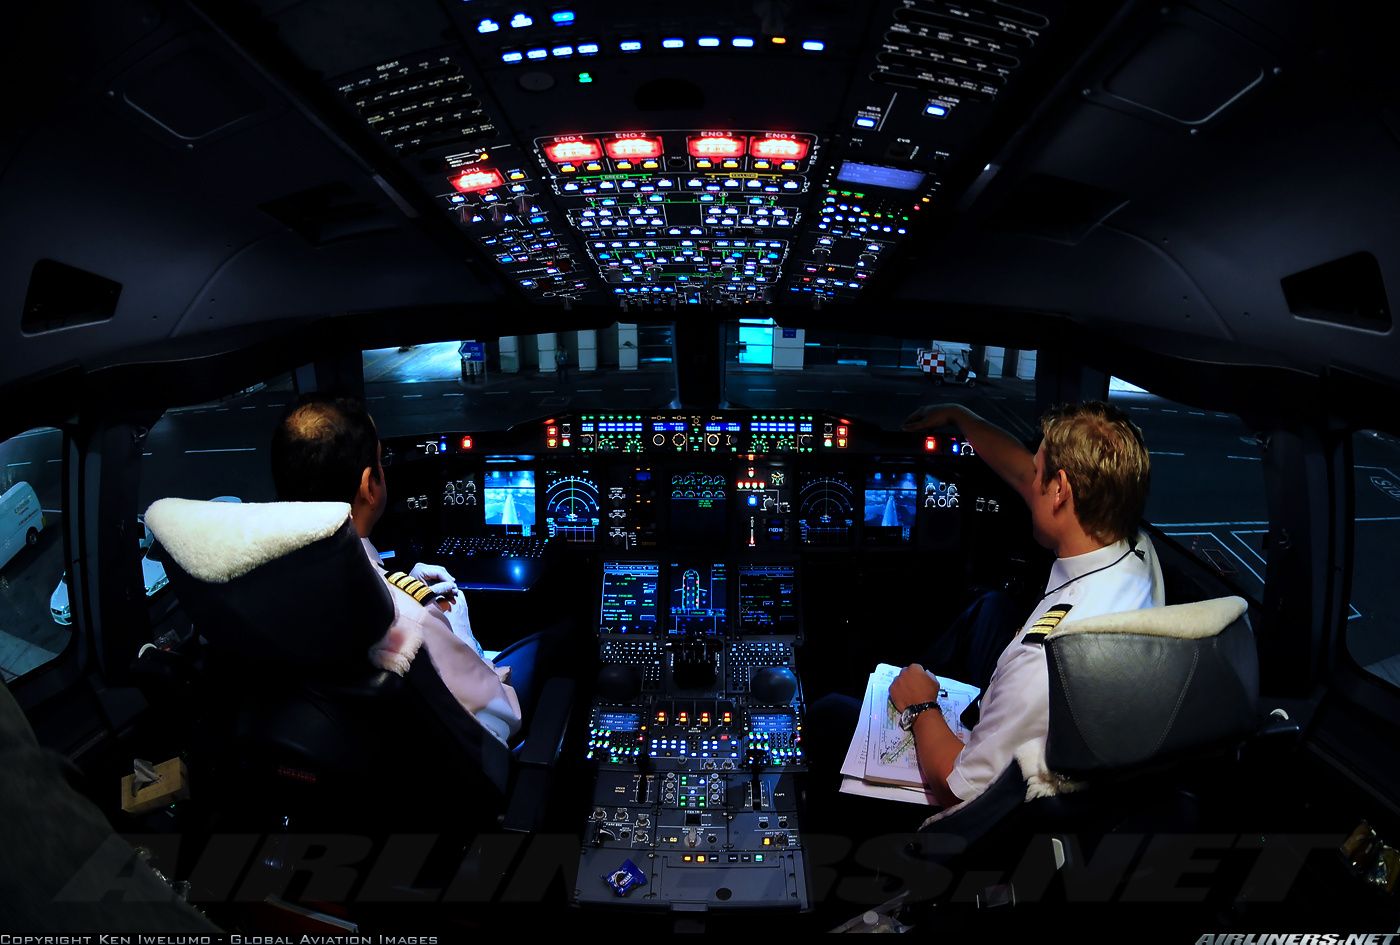 Air Safety Regulator Bans Pilots From Clicking Photo While On Duty